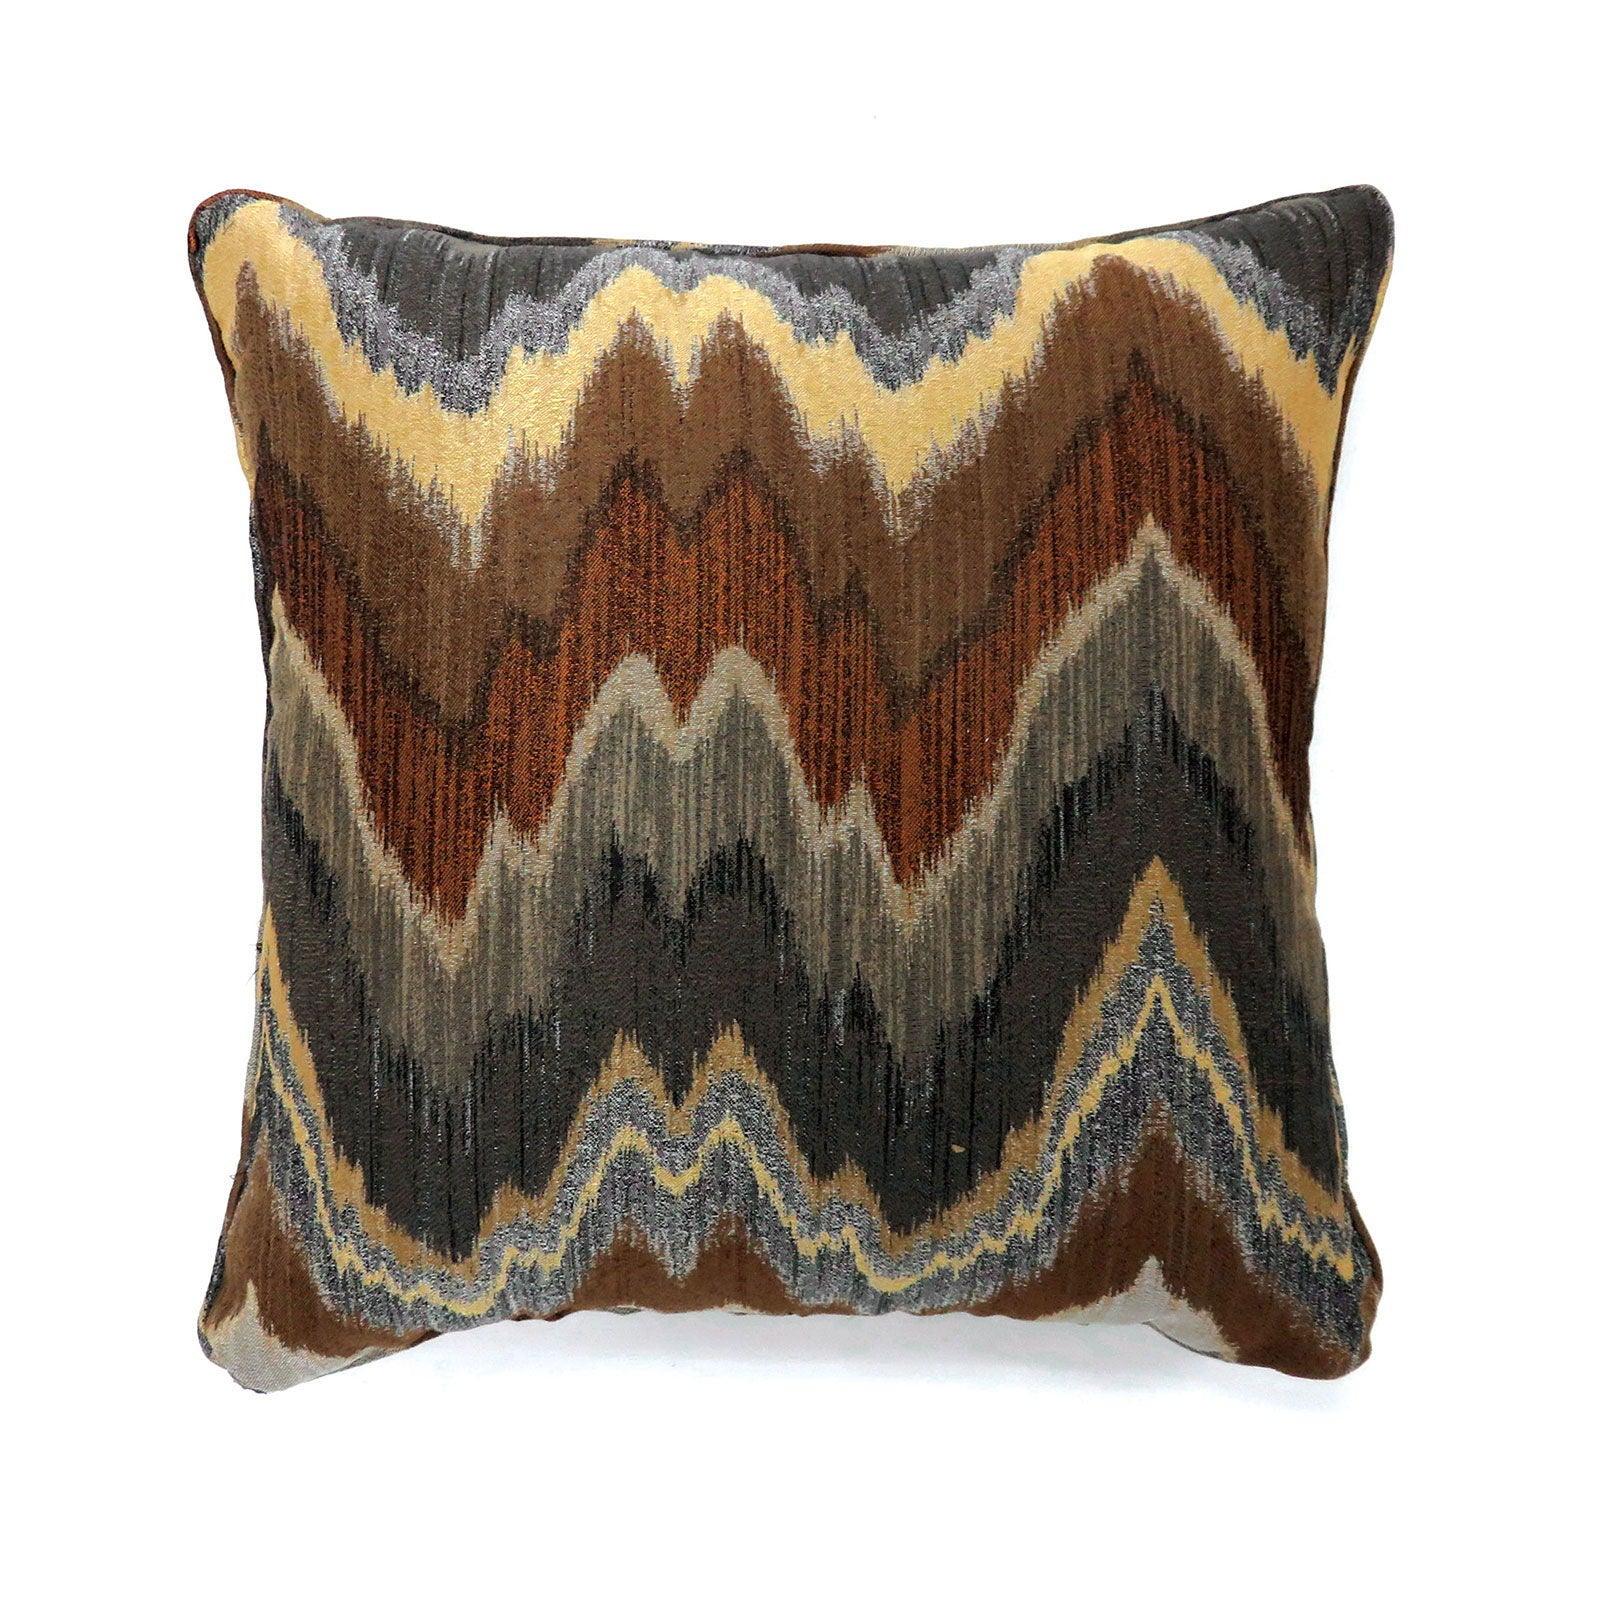 Furniture of America - Seismy - Pillow (Set of 2) - Brown / Multi - 5th Avenue Furniture